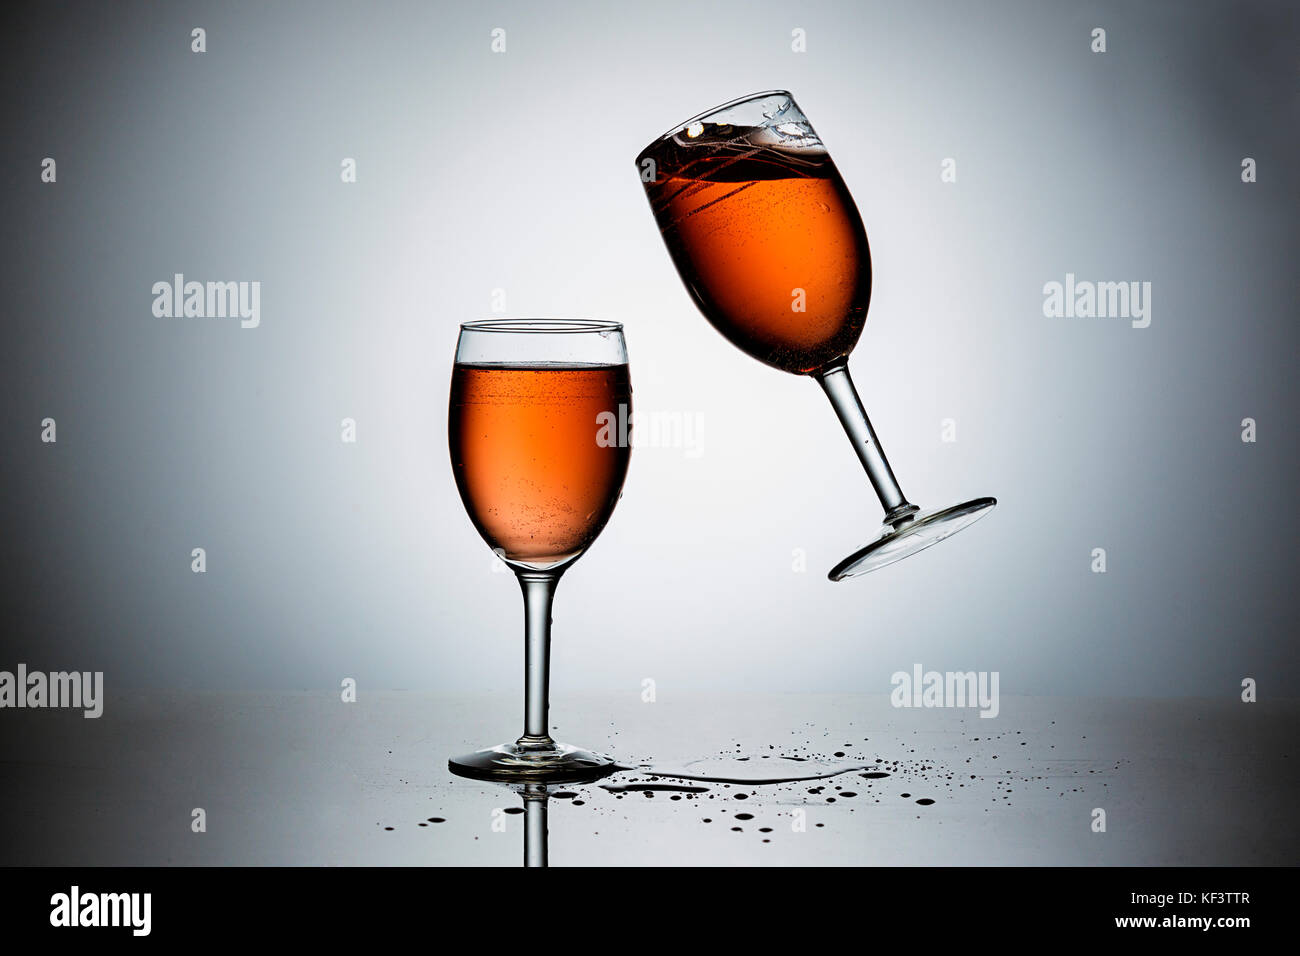 Dropping a wineglass filled with wine onto another. Stock Photo